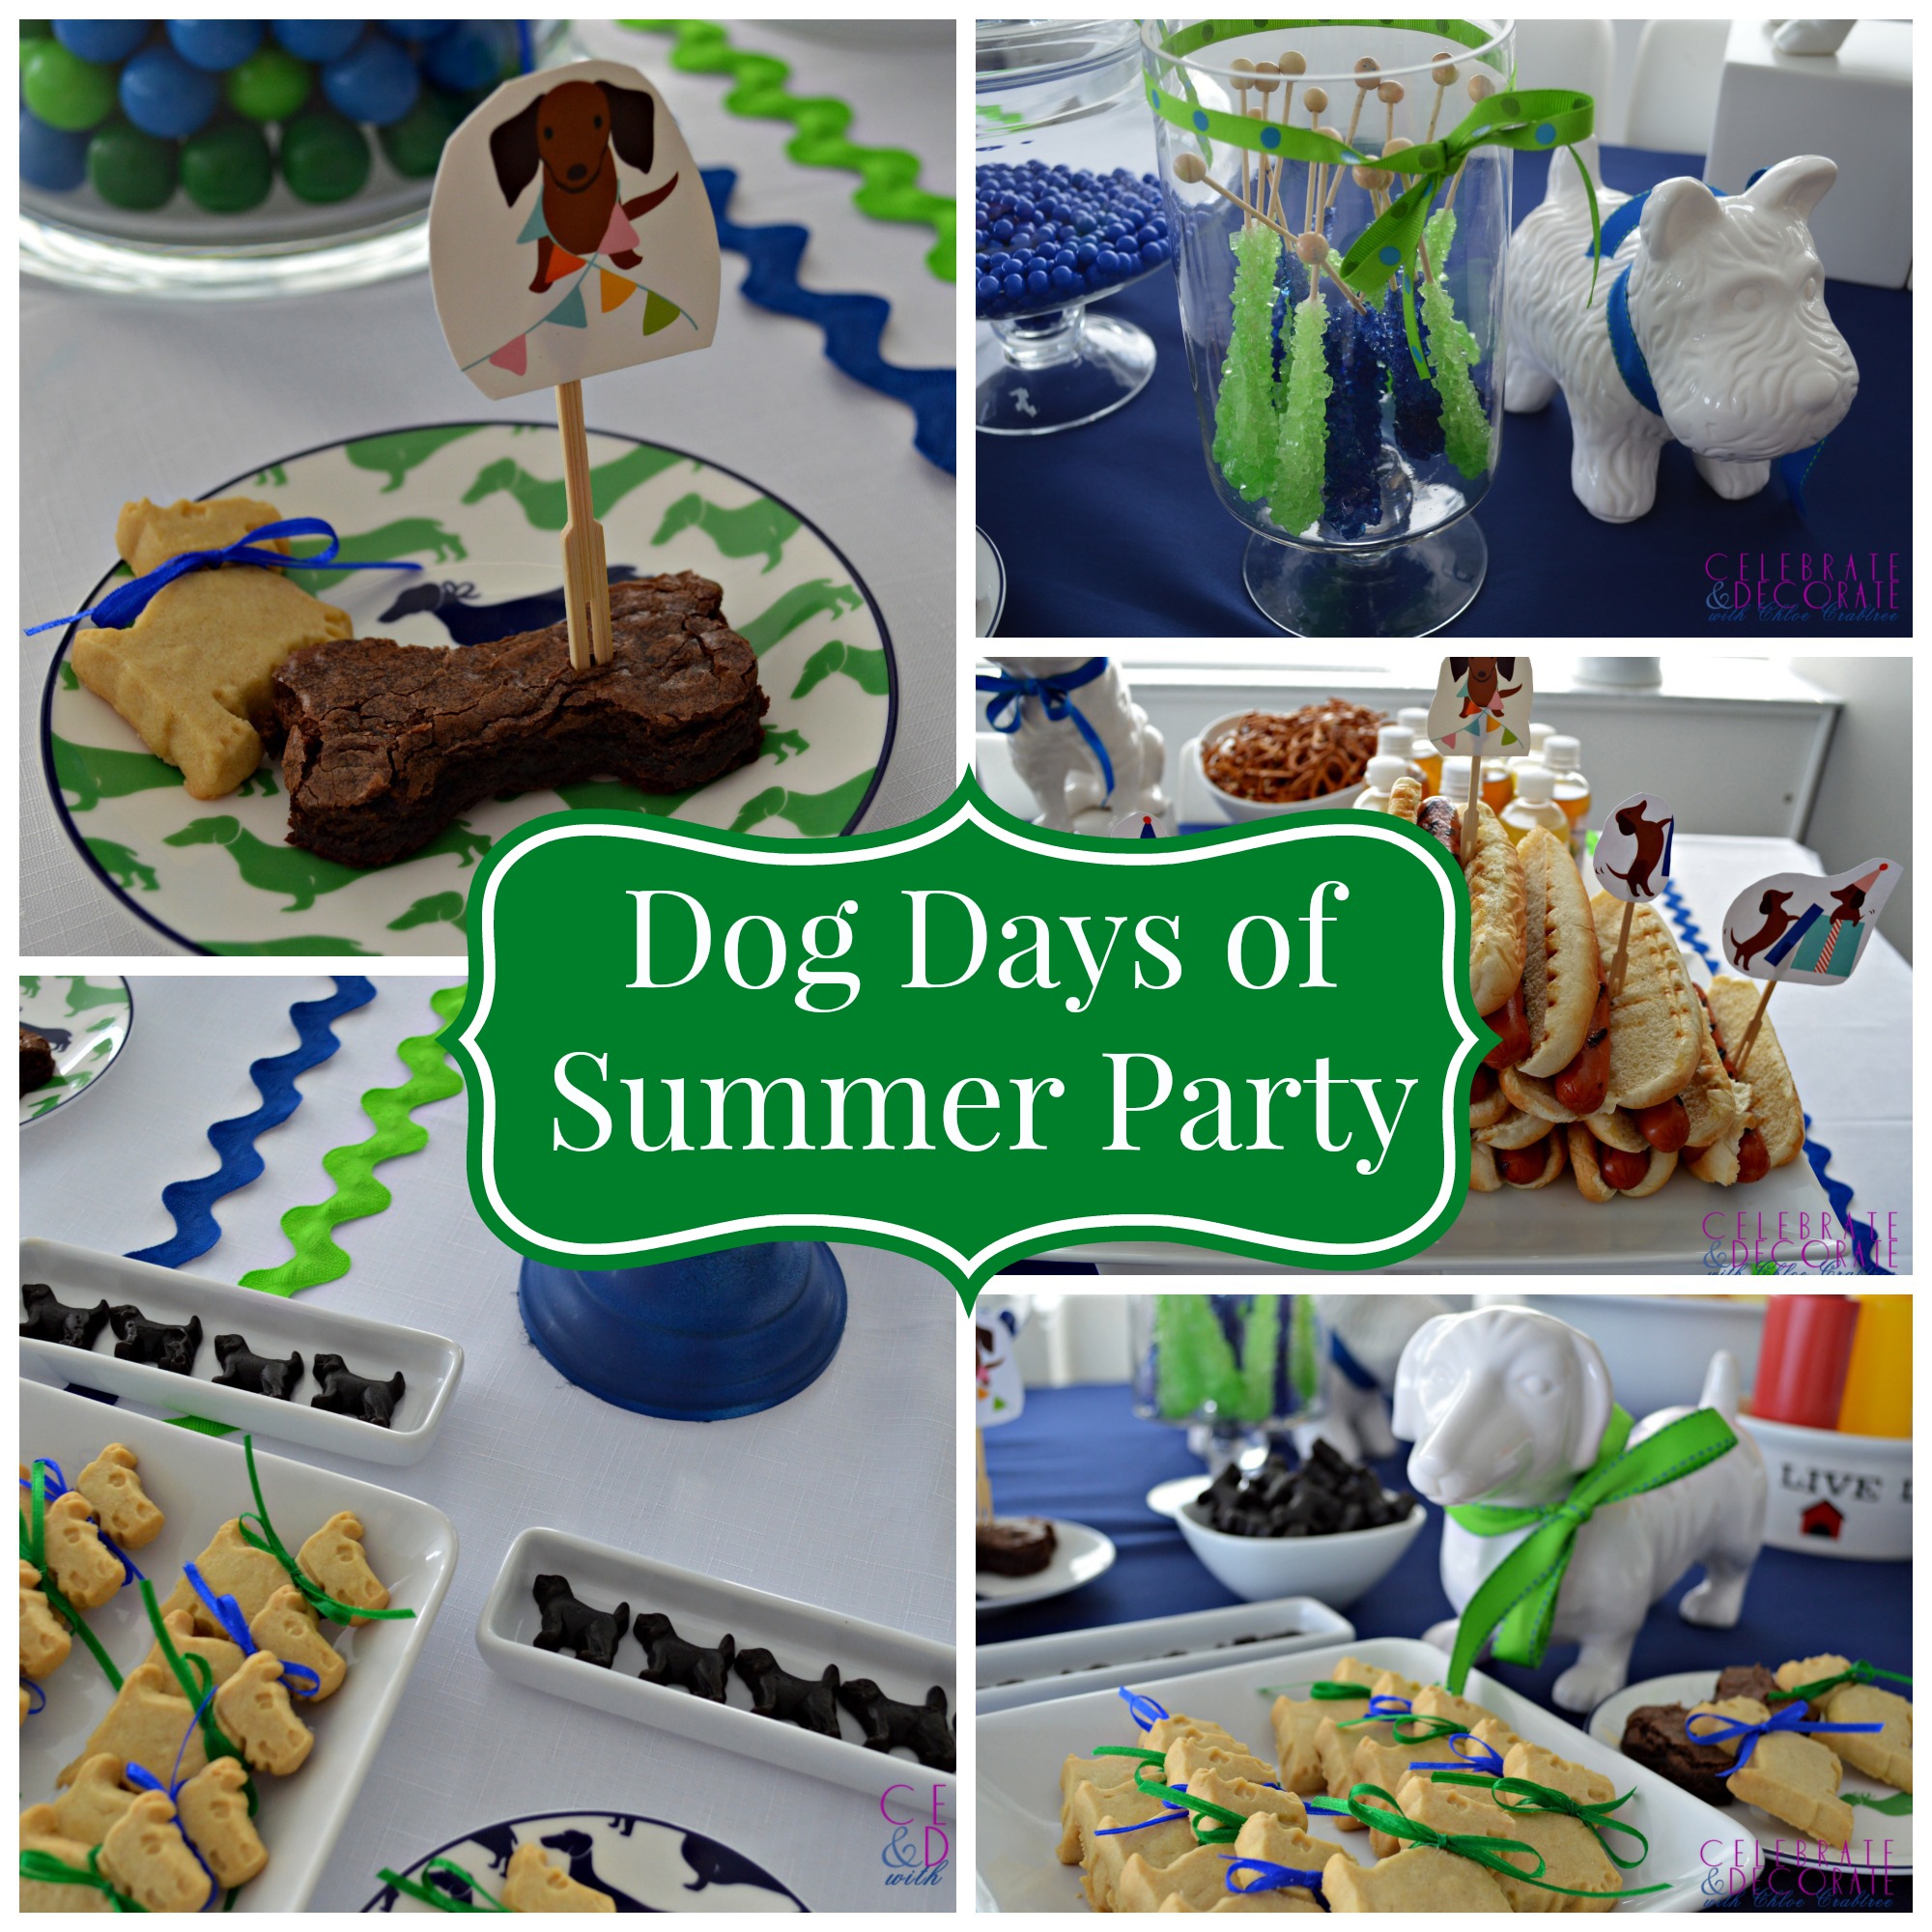 Dog Days of summer party and more summer party ideas!